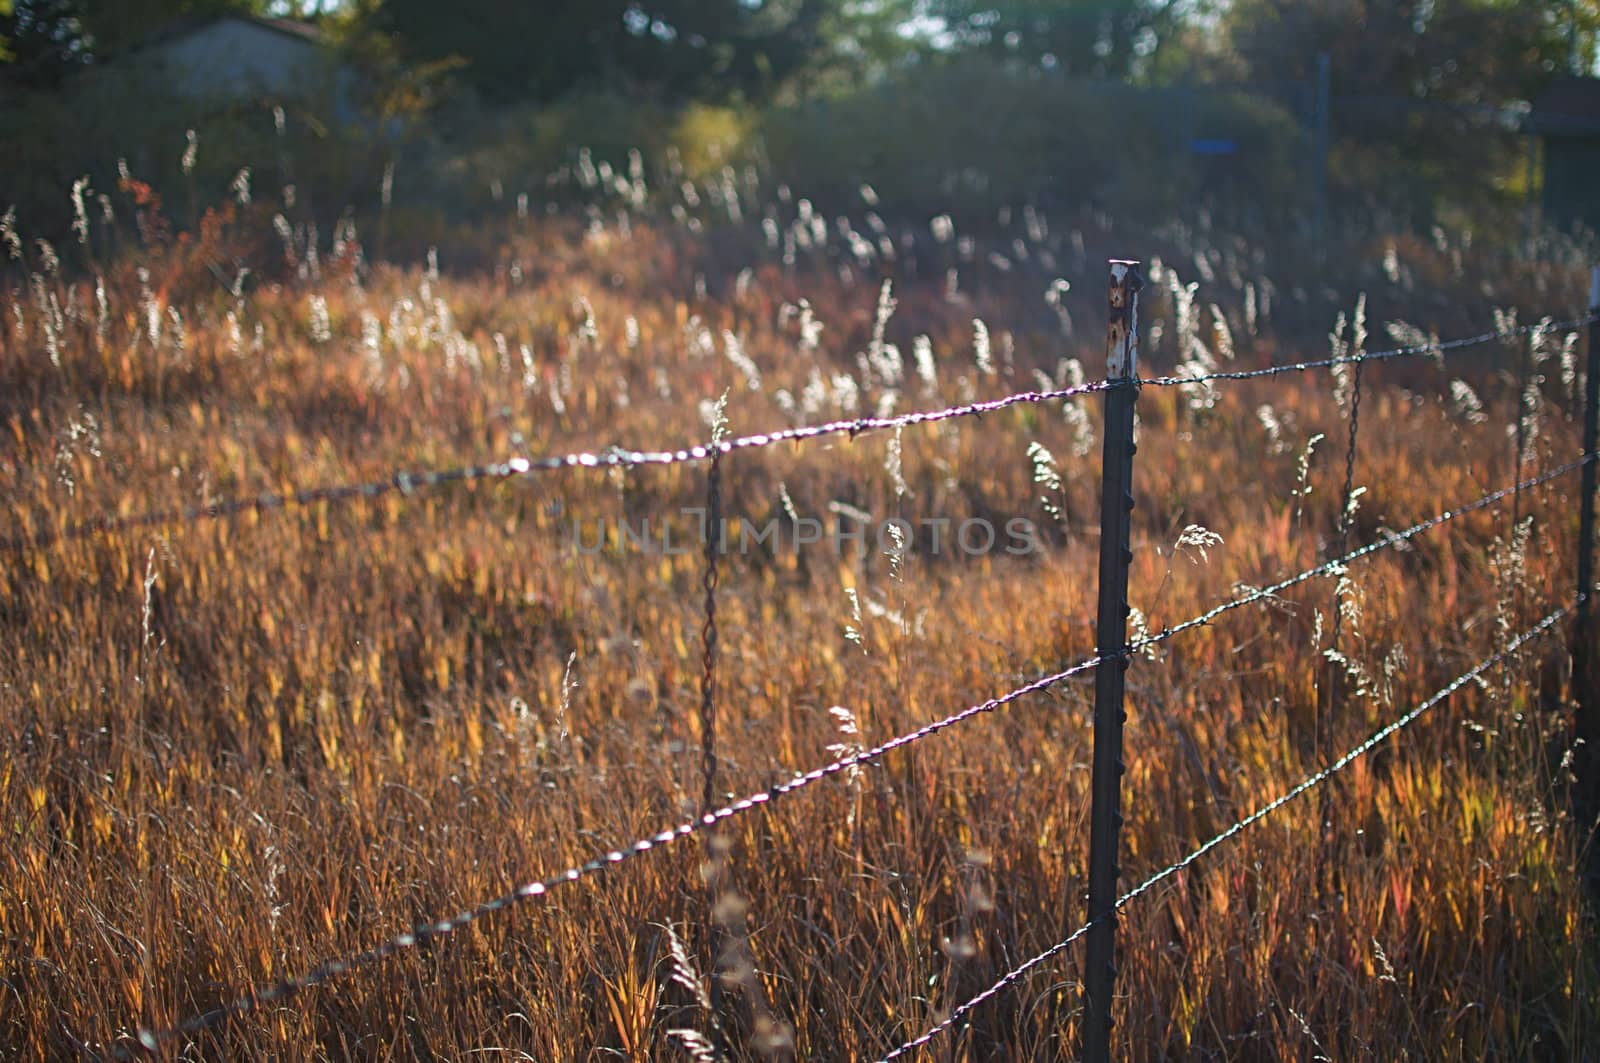 A barbed wire fence shines in the evening sunlight.